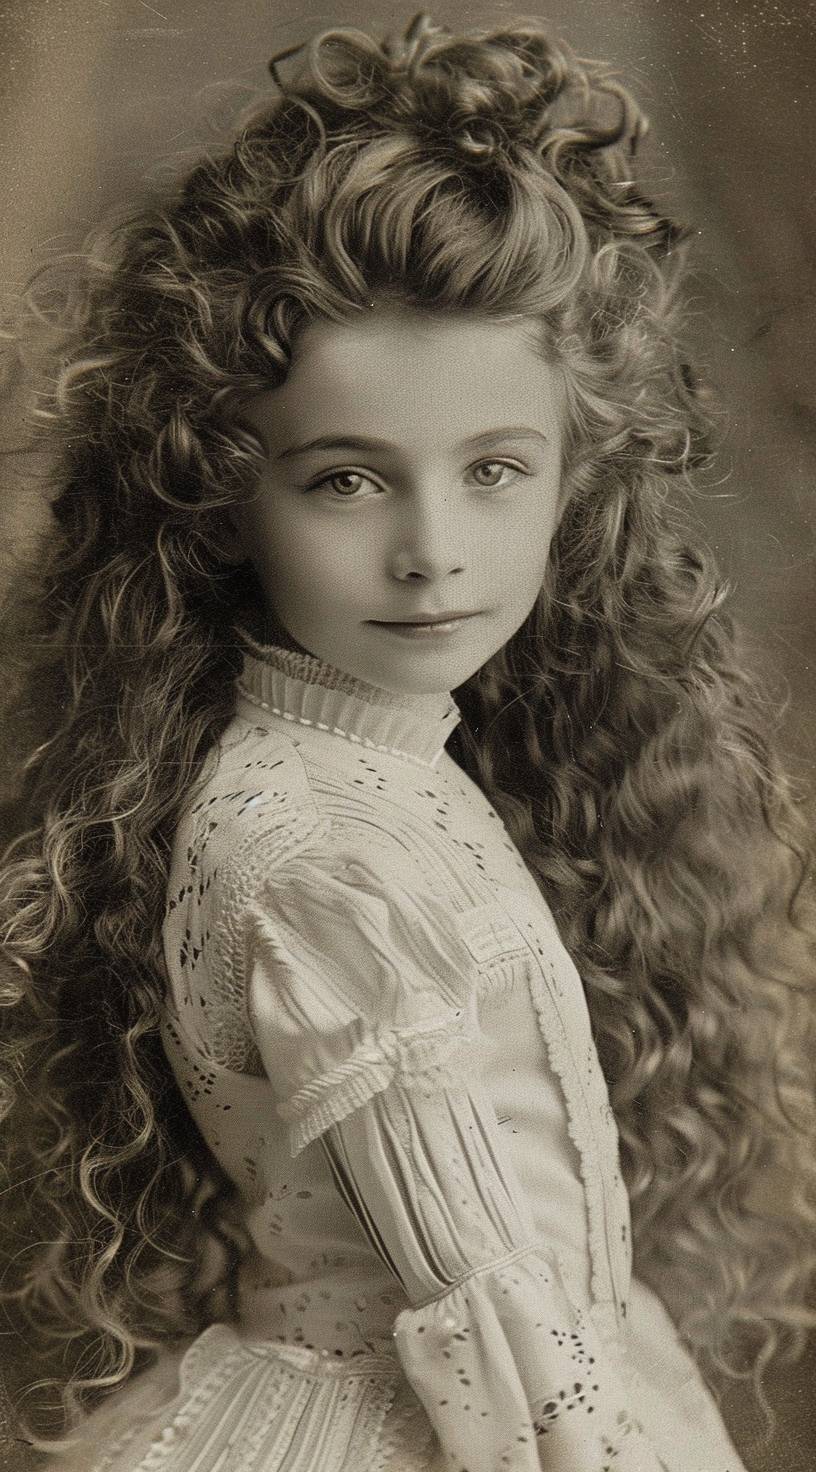 A young girl with long curly hair, wearing white and a high collar dress in the early 20th century, posing for an old photo. The picture is full of details, showing her elegant appearance and gorgeous style in the style of an early 20th century photographer.